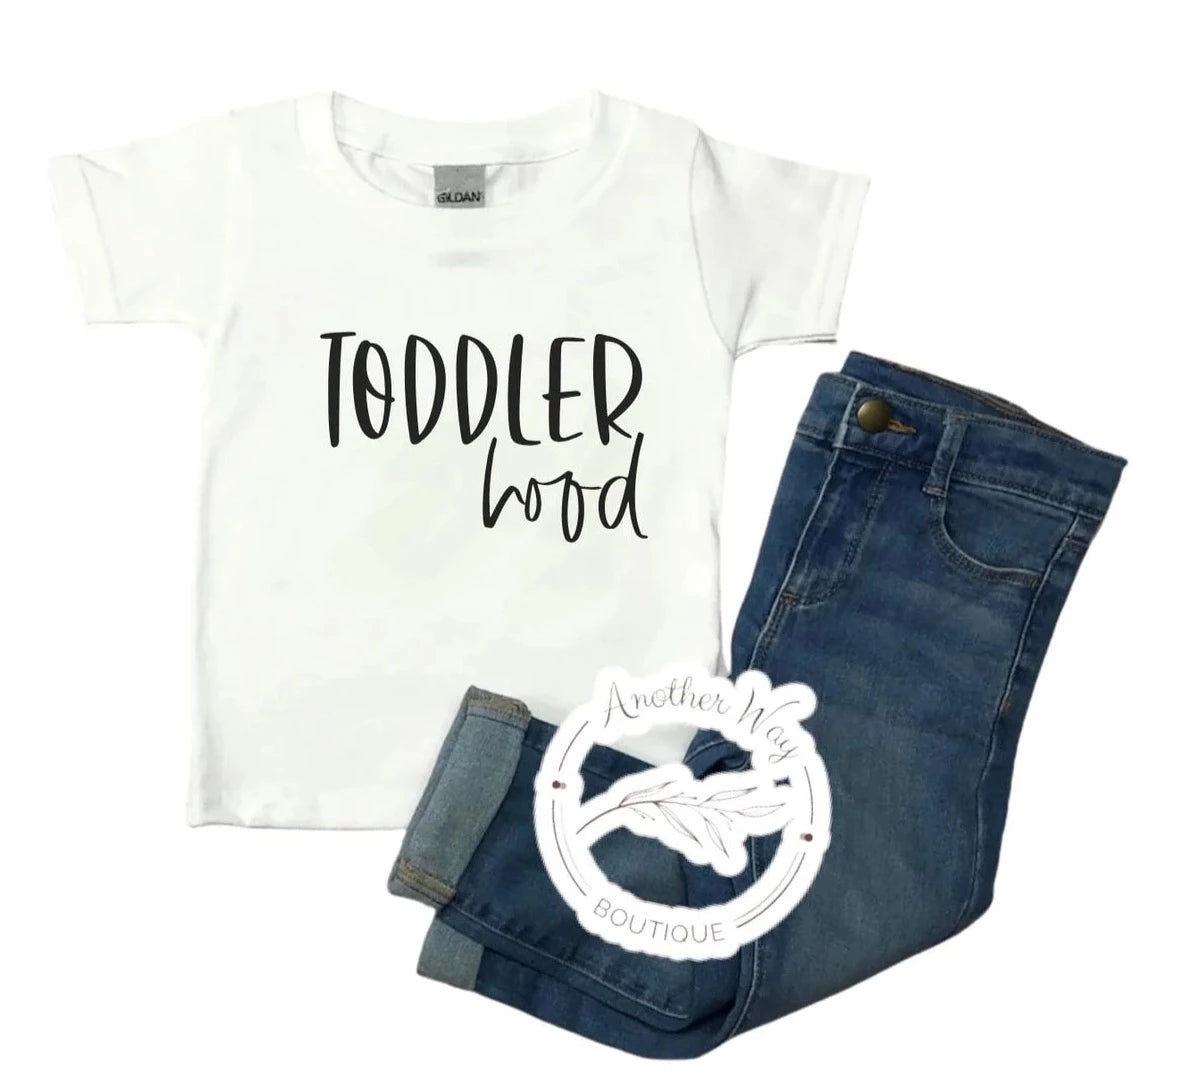 "Toddler hood" - Another Way Boutique